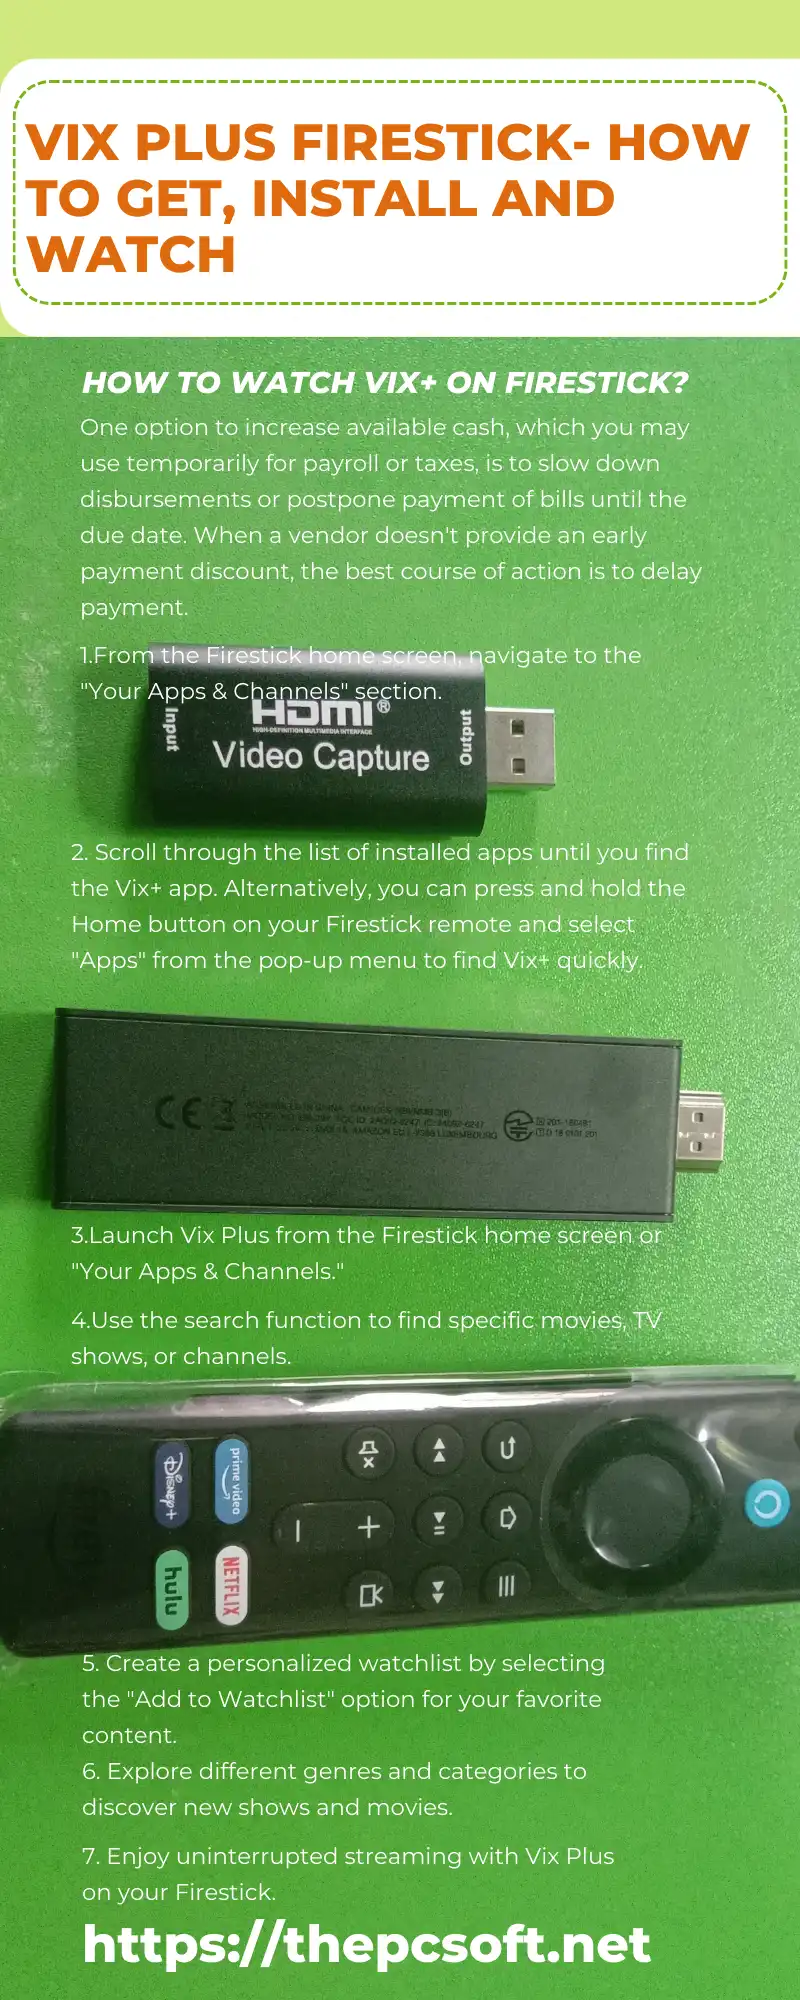 VIX Plus Firestick- How to Get, Install and Watch